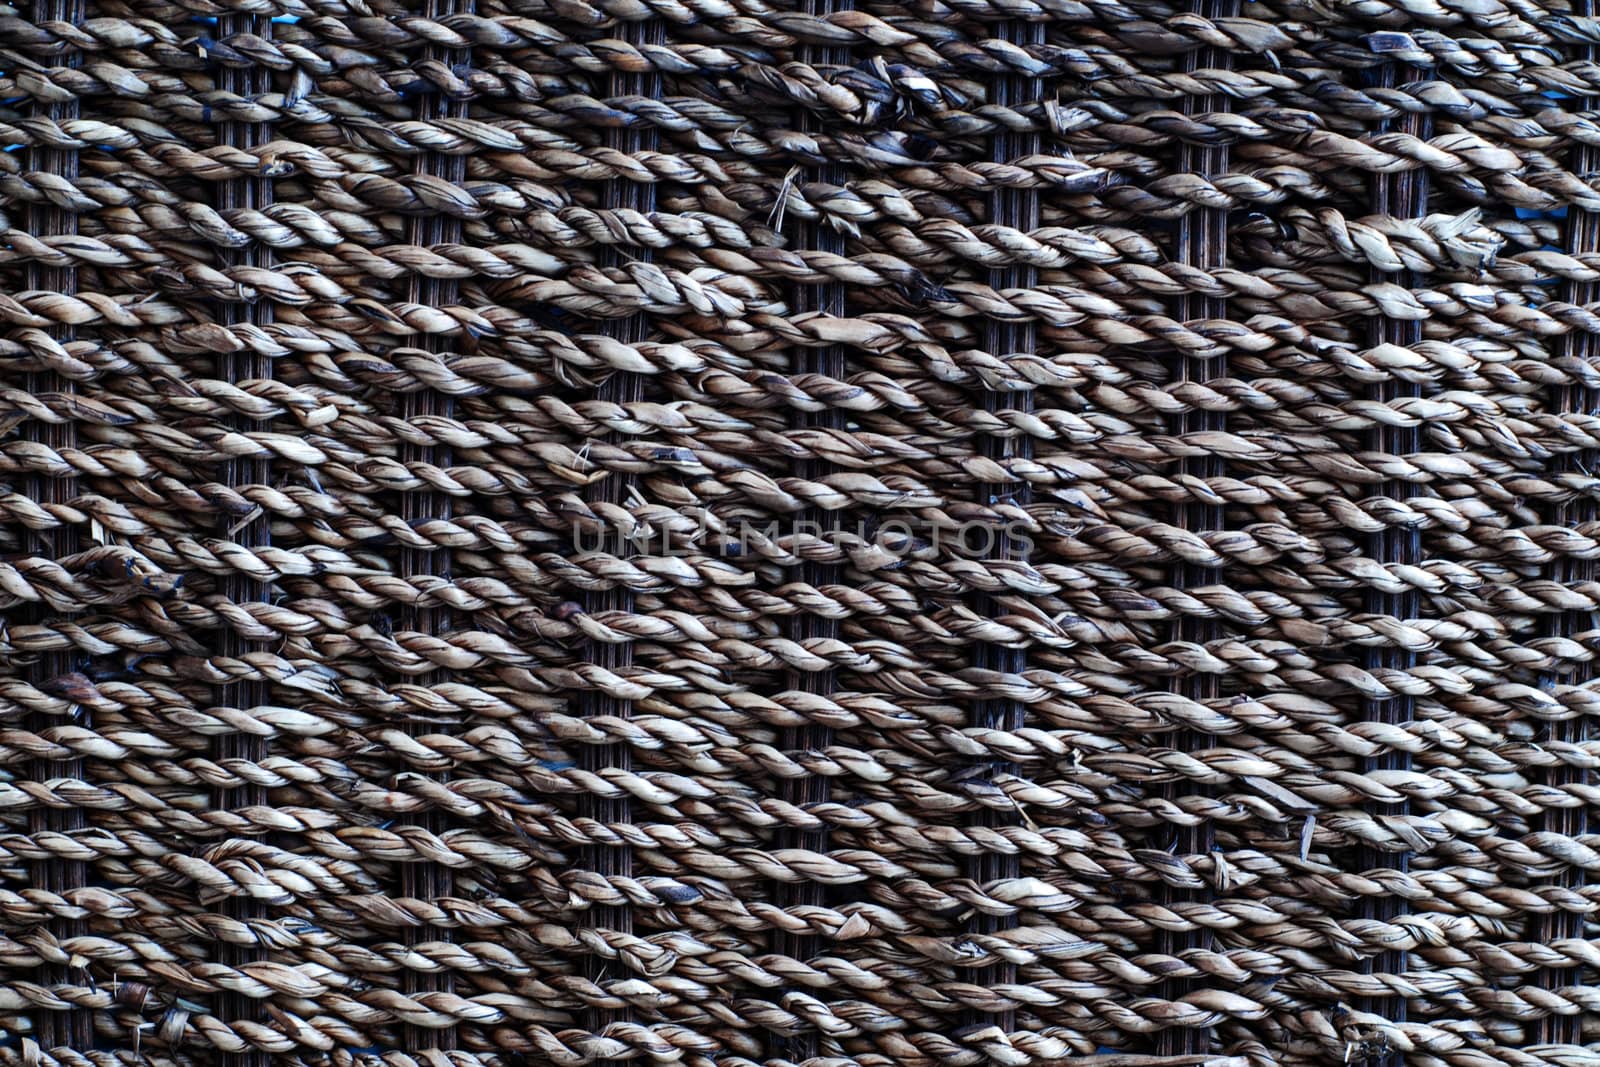 Rattan background of rustic interlaced straw